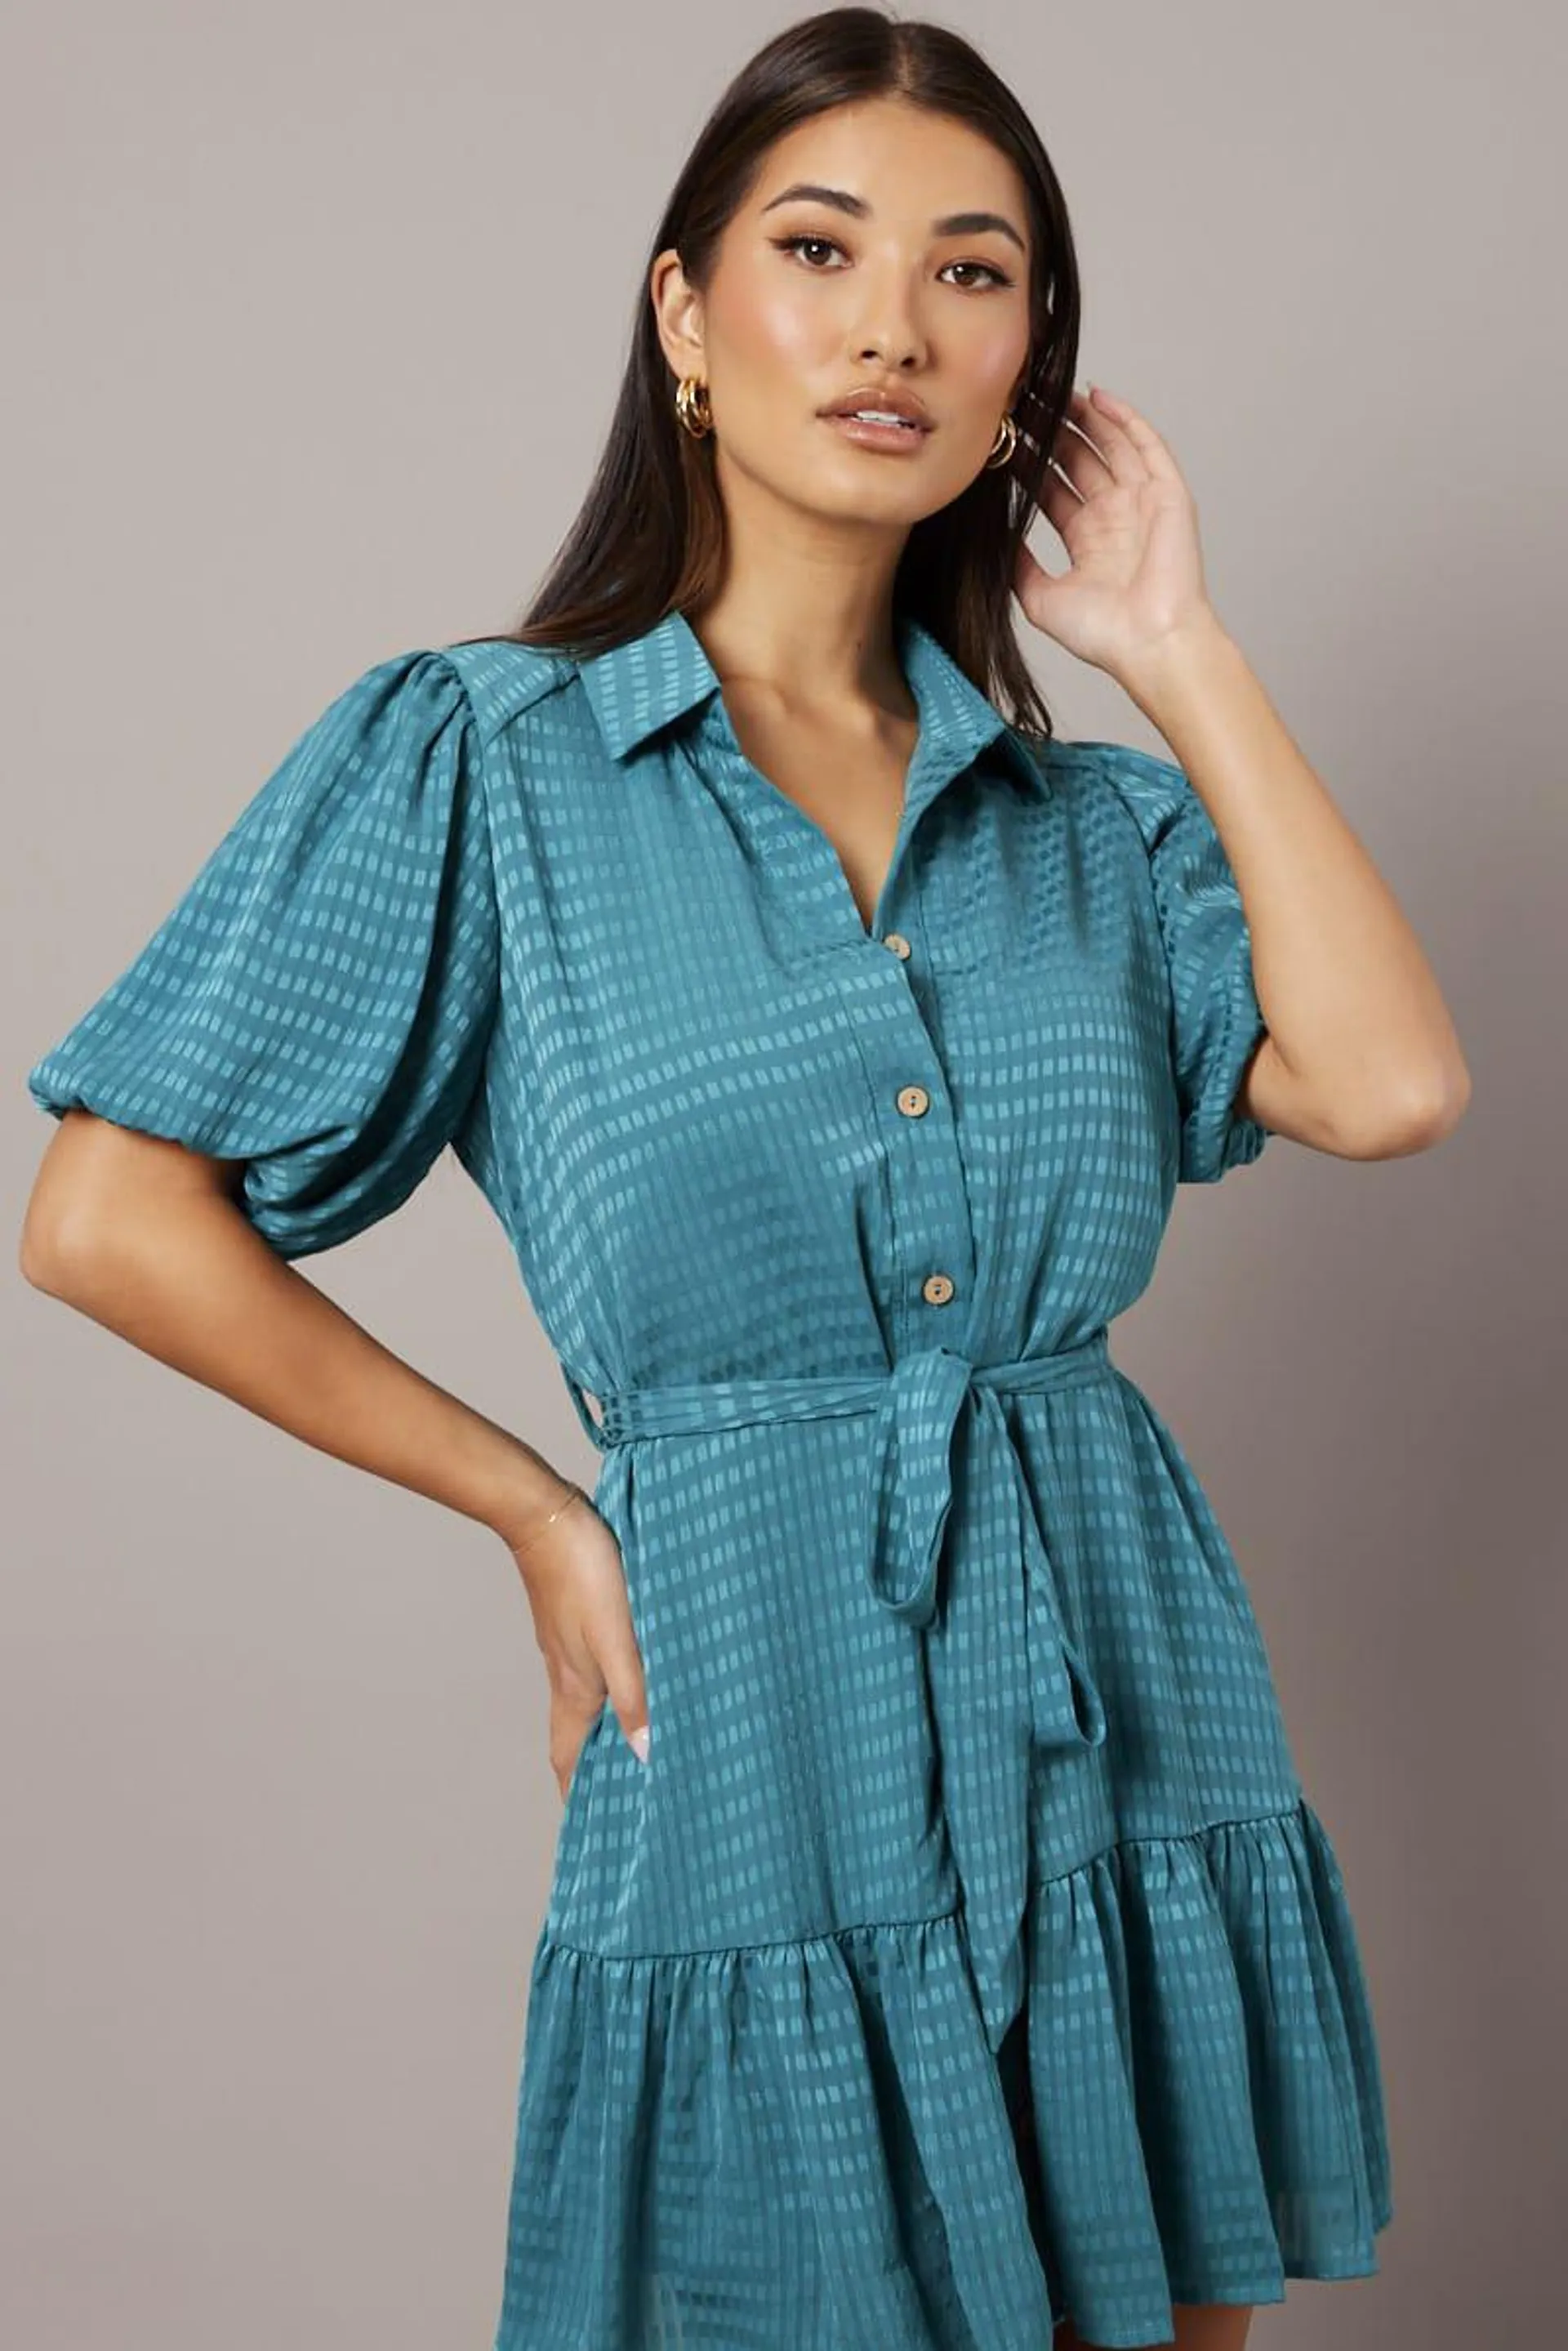 Green Fit And Flare Dress Short Sleeve Mini